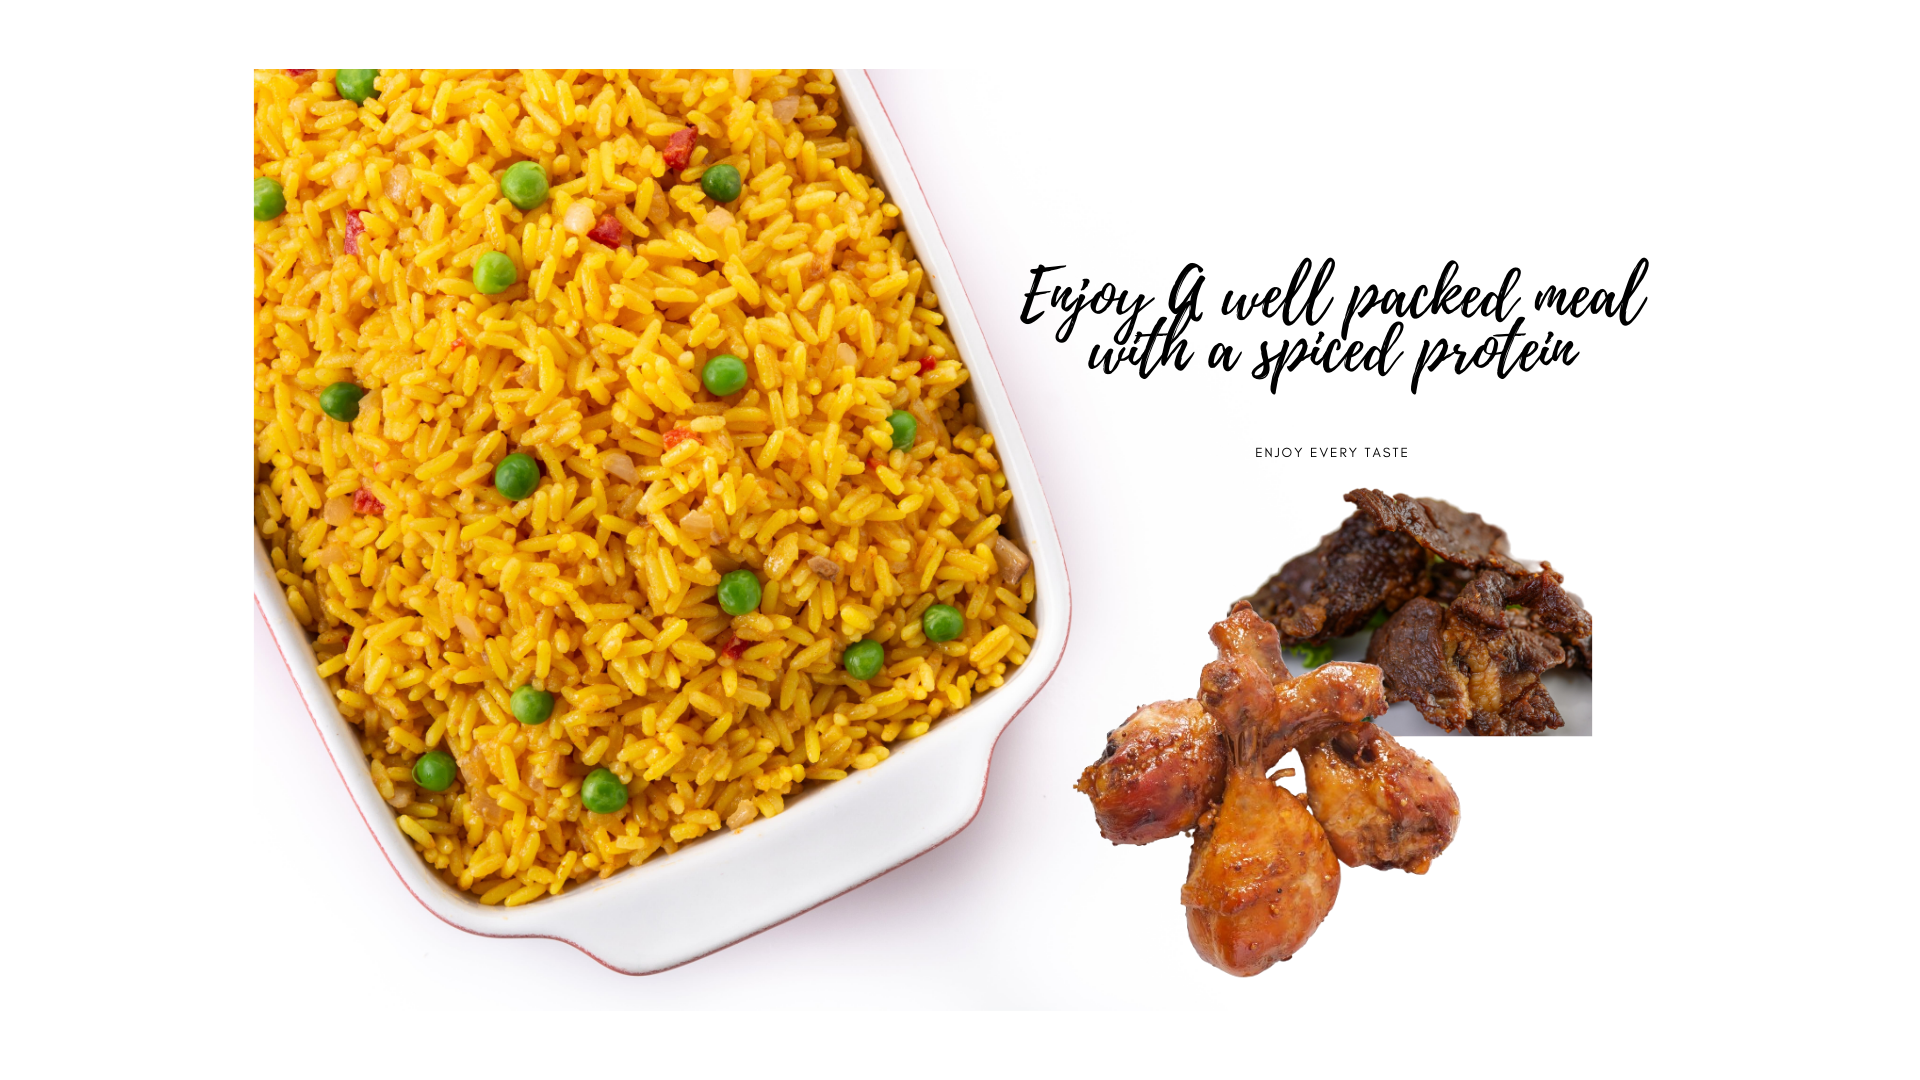 Enjoy A well packed meal with well spiced protein